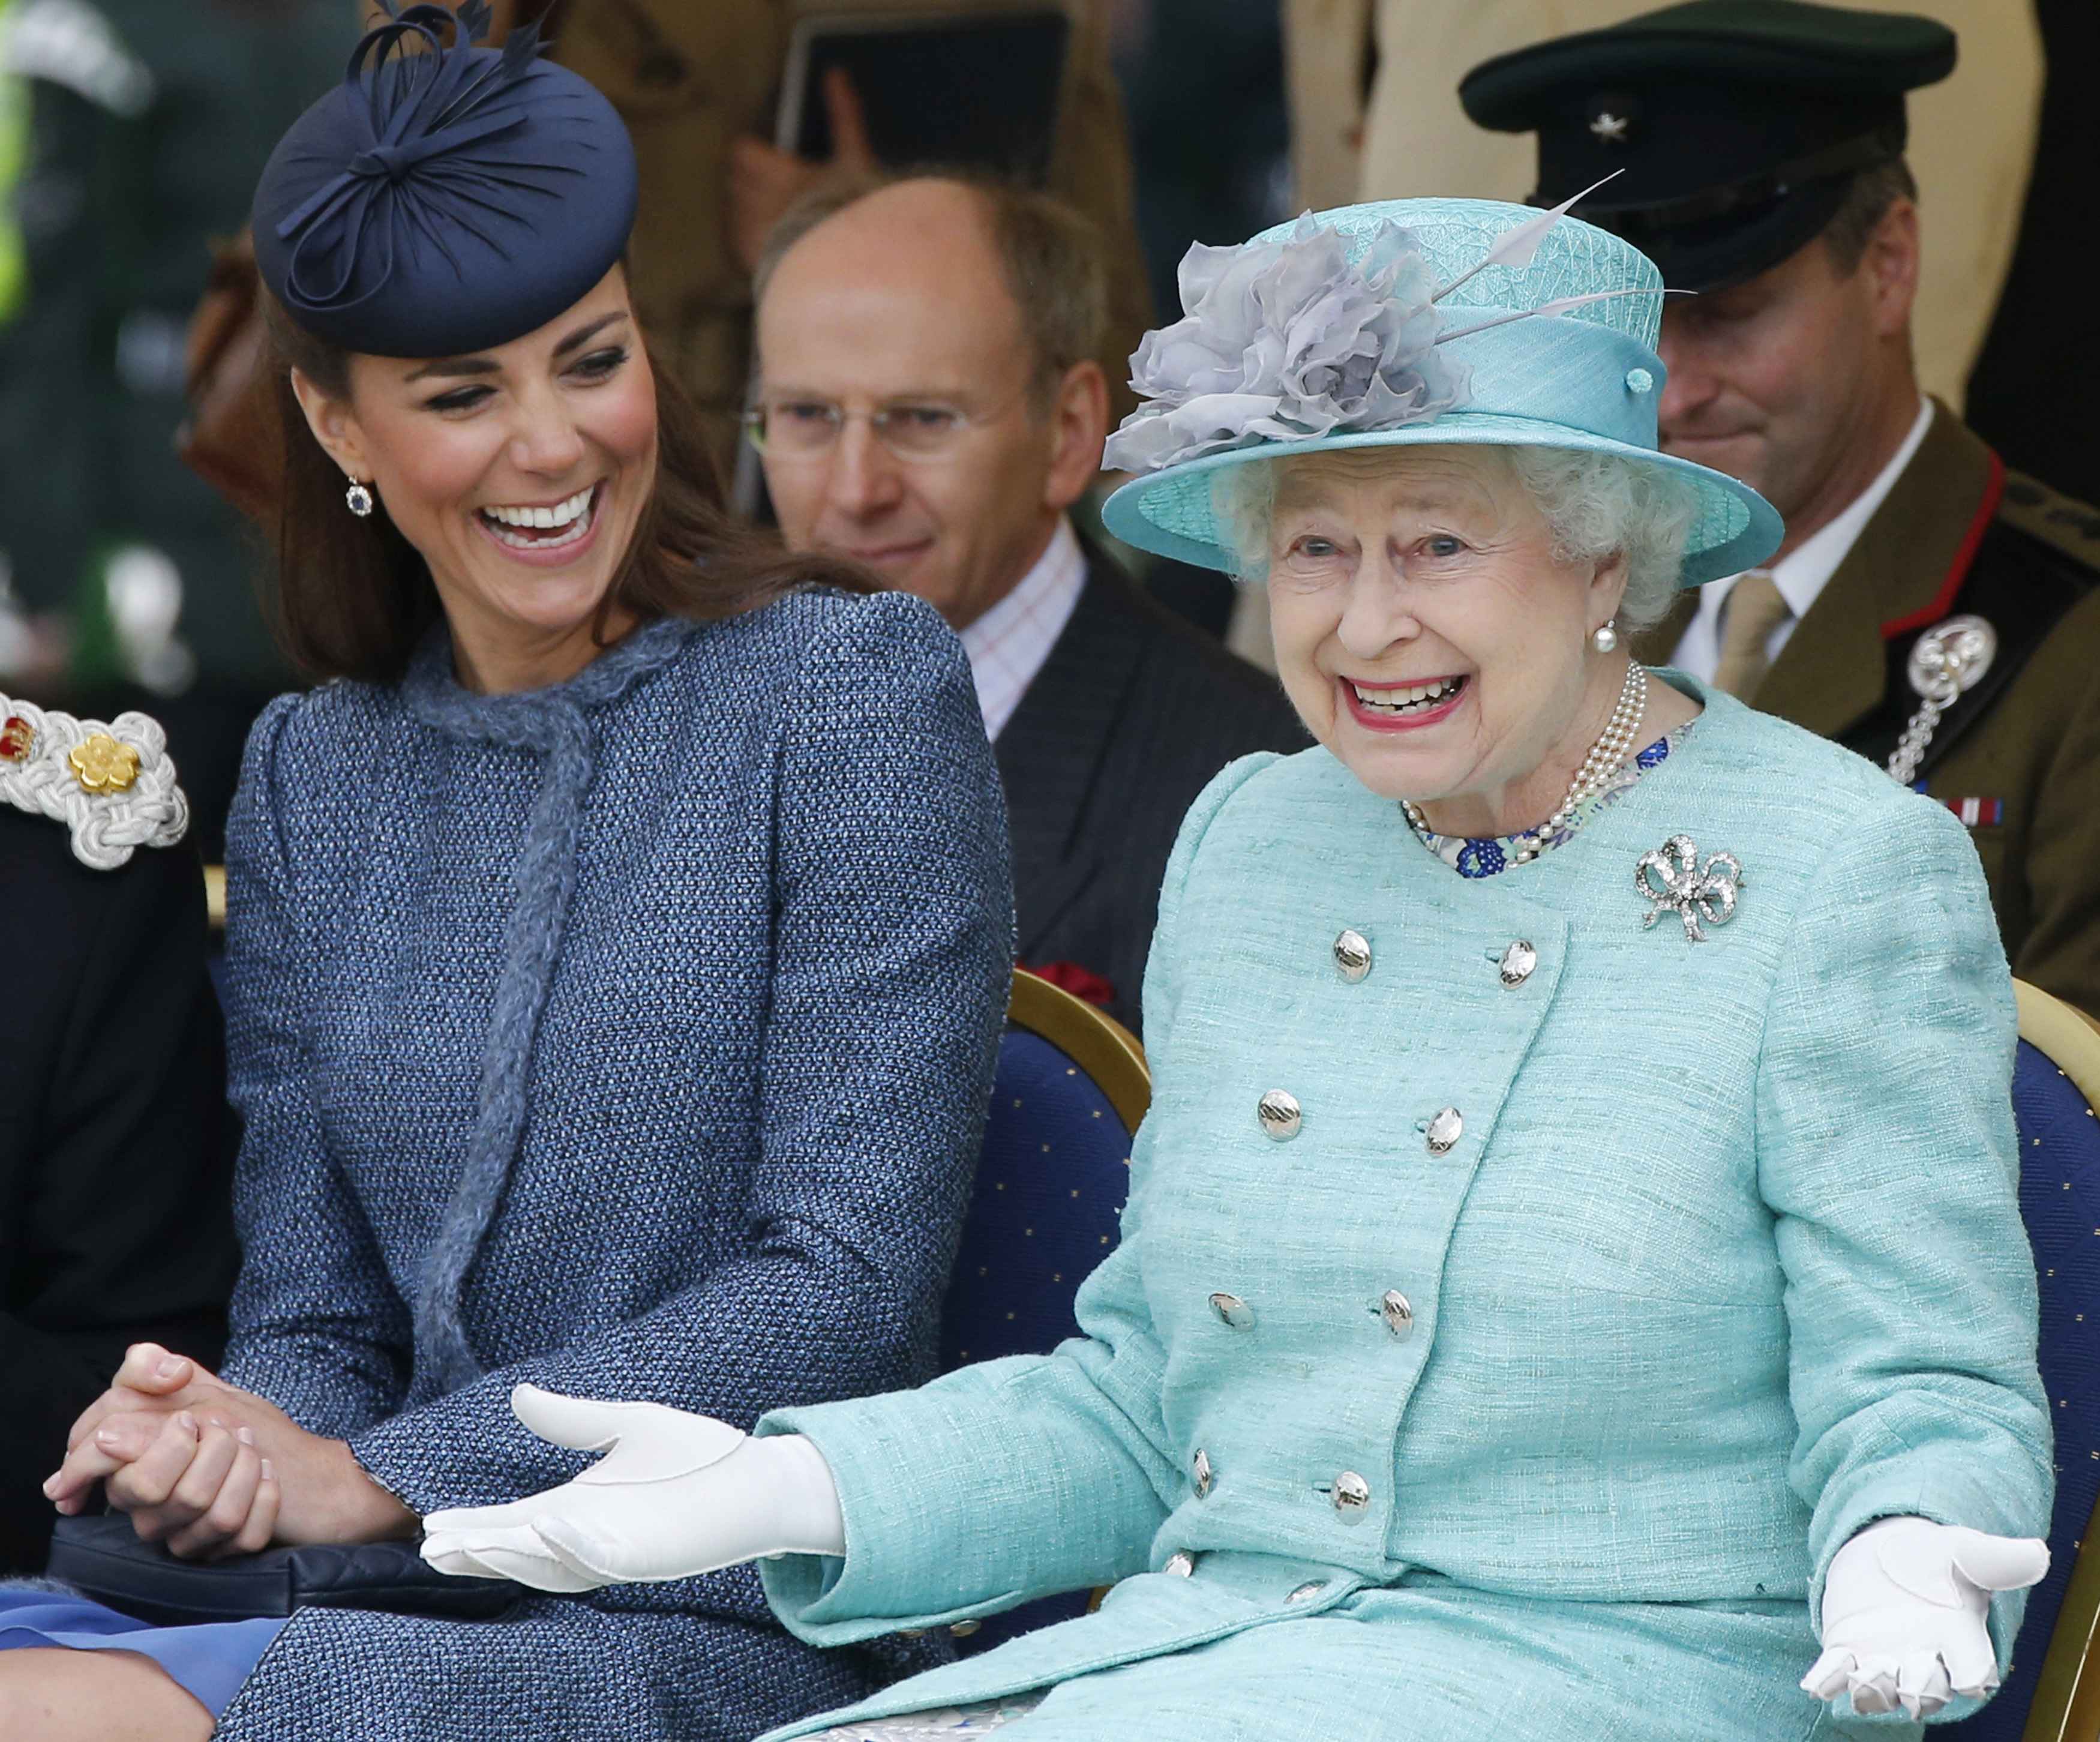 Catherine, Duchess of Cambridge, and Queen Elizabeth II watch part of a children's sports event while visiting Vernon Park during a Diamond Jubilee visit to Nottingham on June 13, 2012 in Nottingham, England. | Source: Getty Images